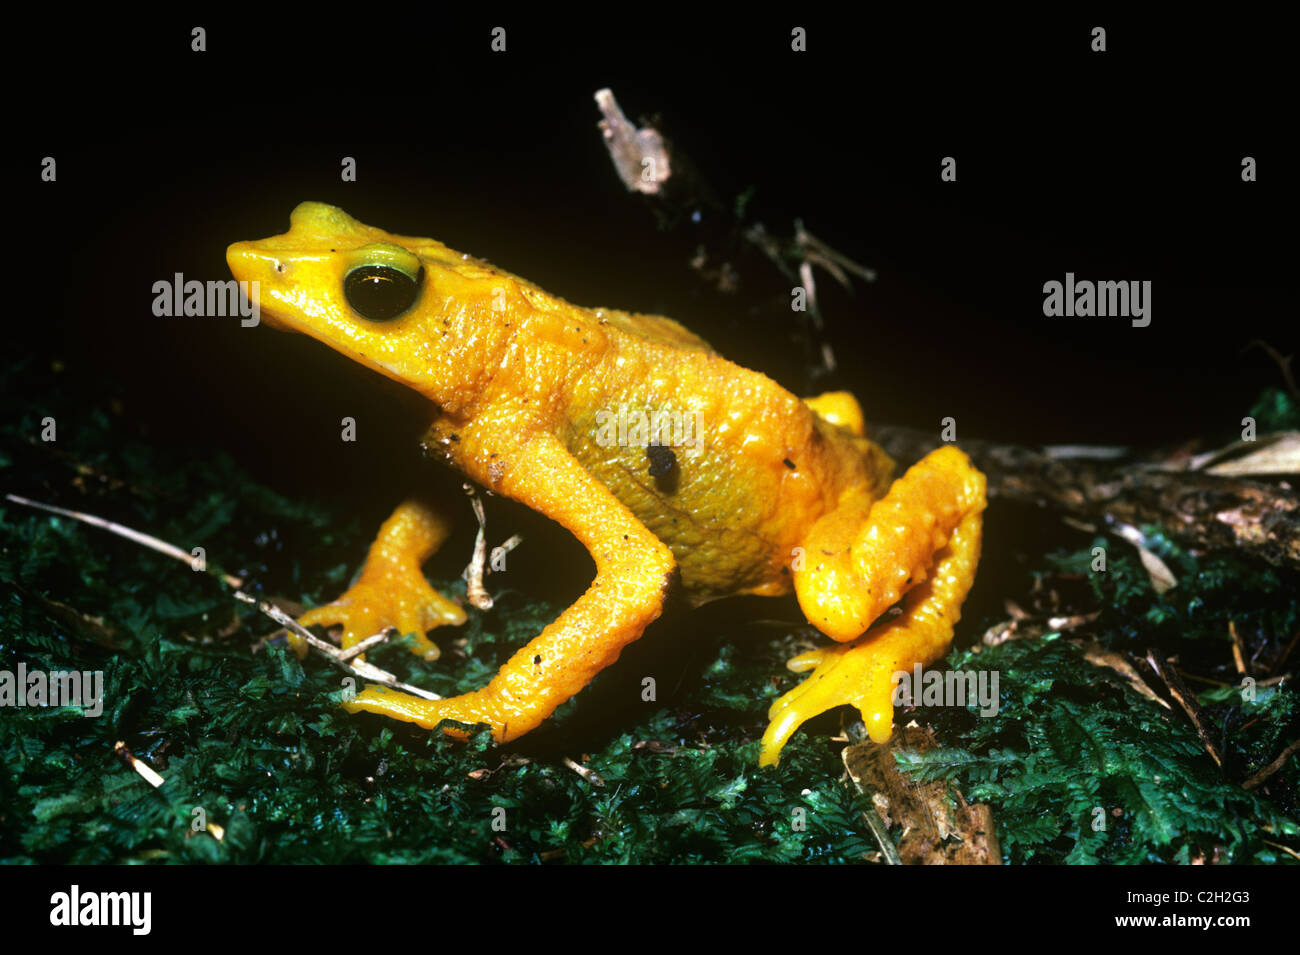 Red-nosed stub-footed toad / Yellow harlequin frog (Atelopus oxyrhynchus: Bufonidae), warningly coloured diurnal in rainforest. Stock Photo